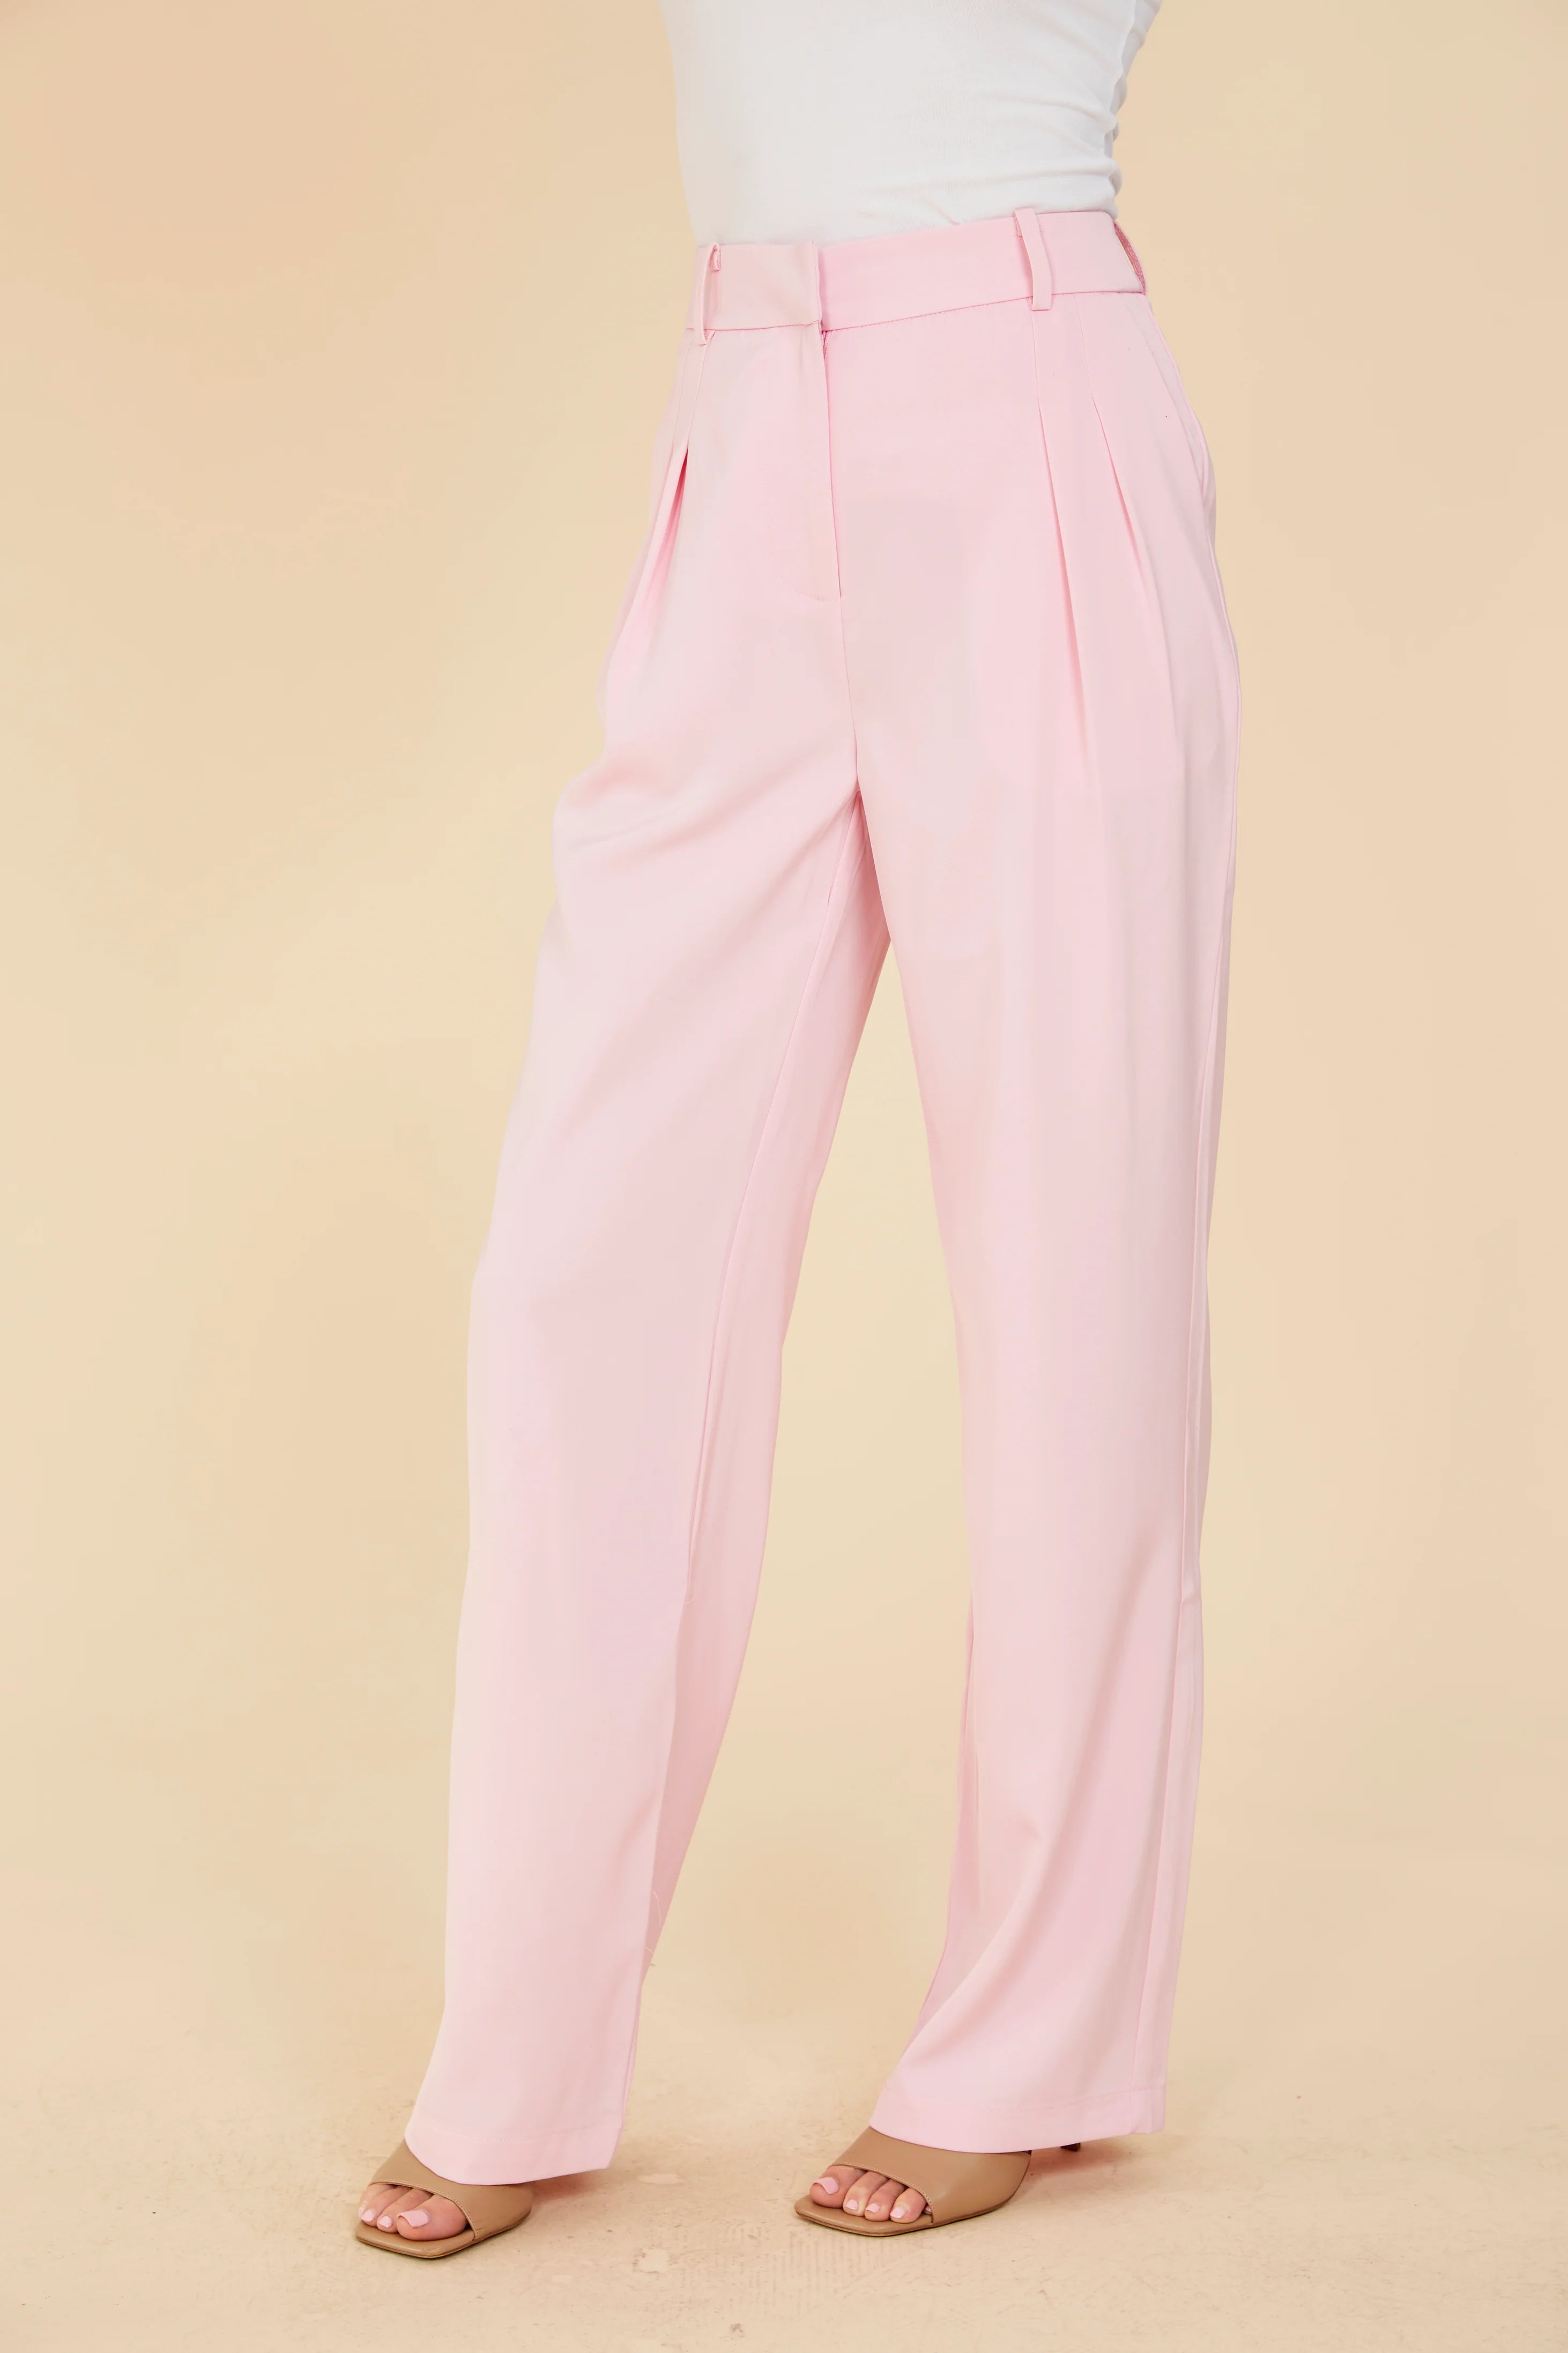 The Classic Suit- Blush Pink